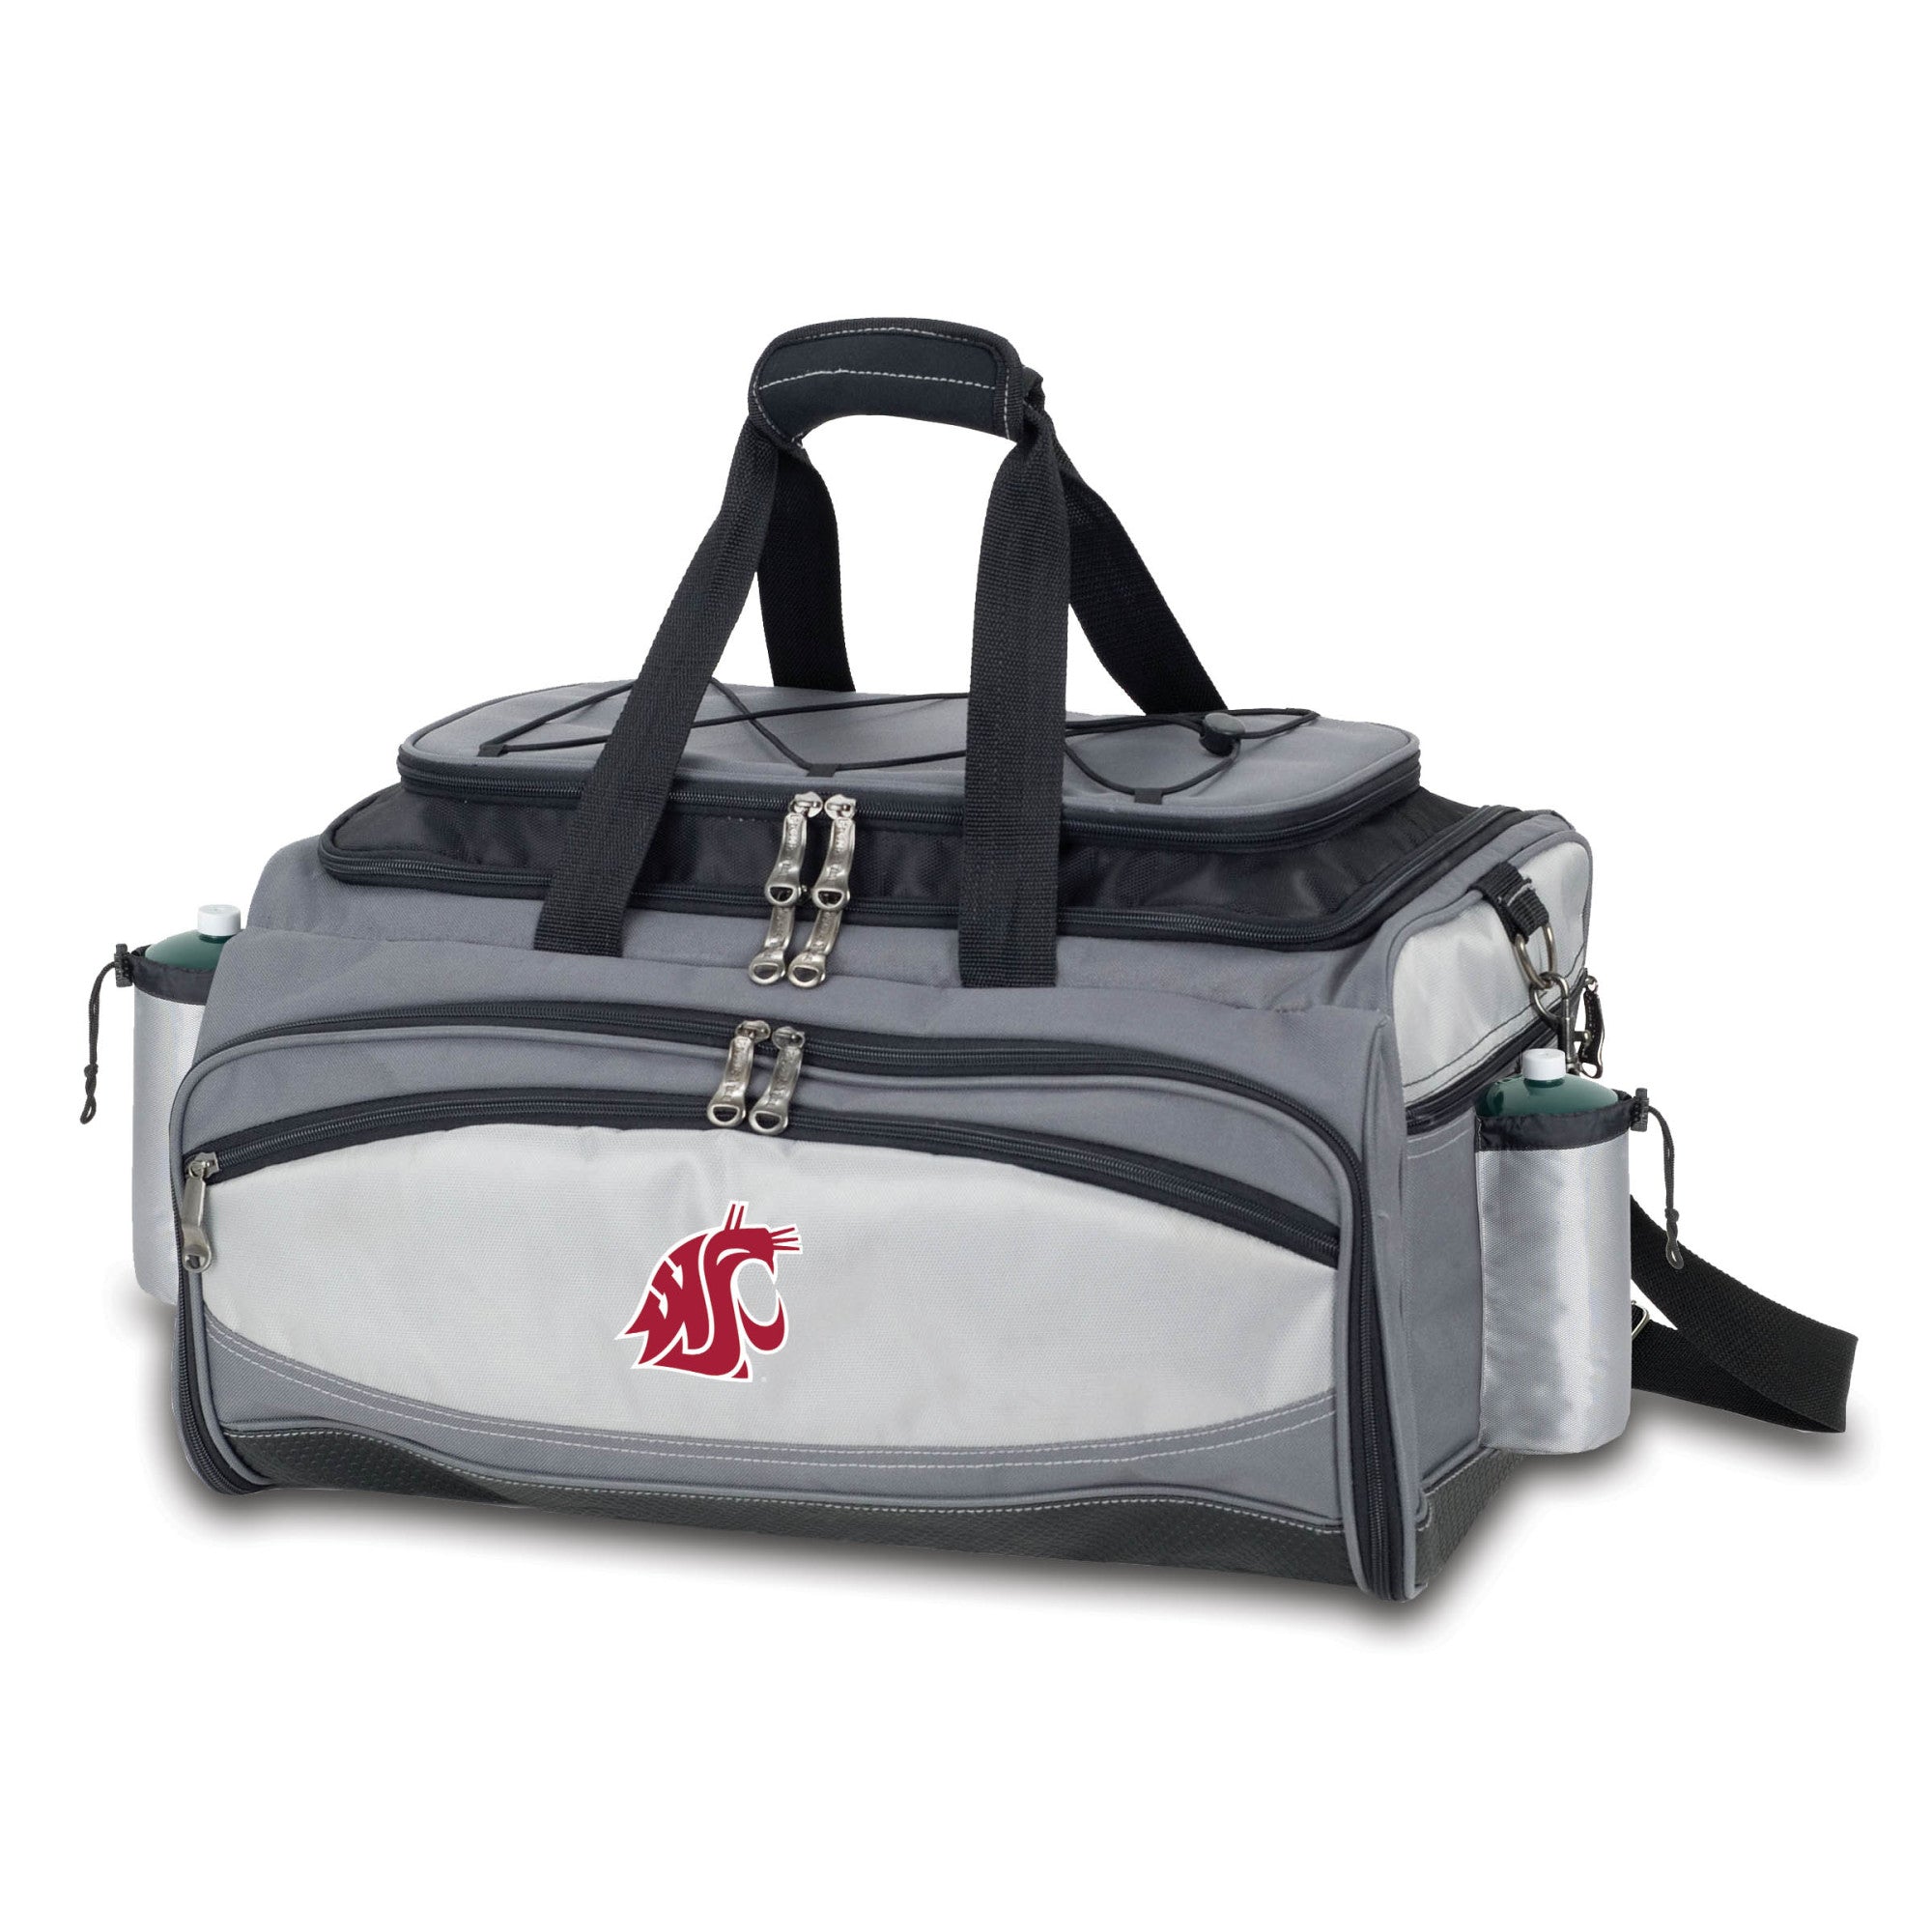 Washington State Cougars - Vulcan Portable Propane Grill & Cooler Tote